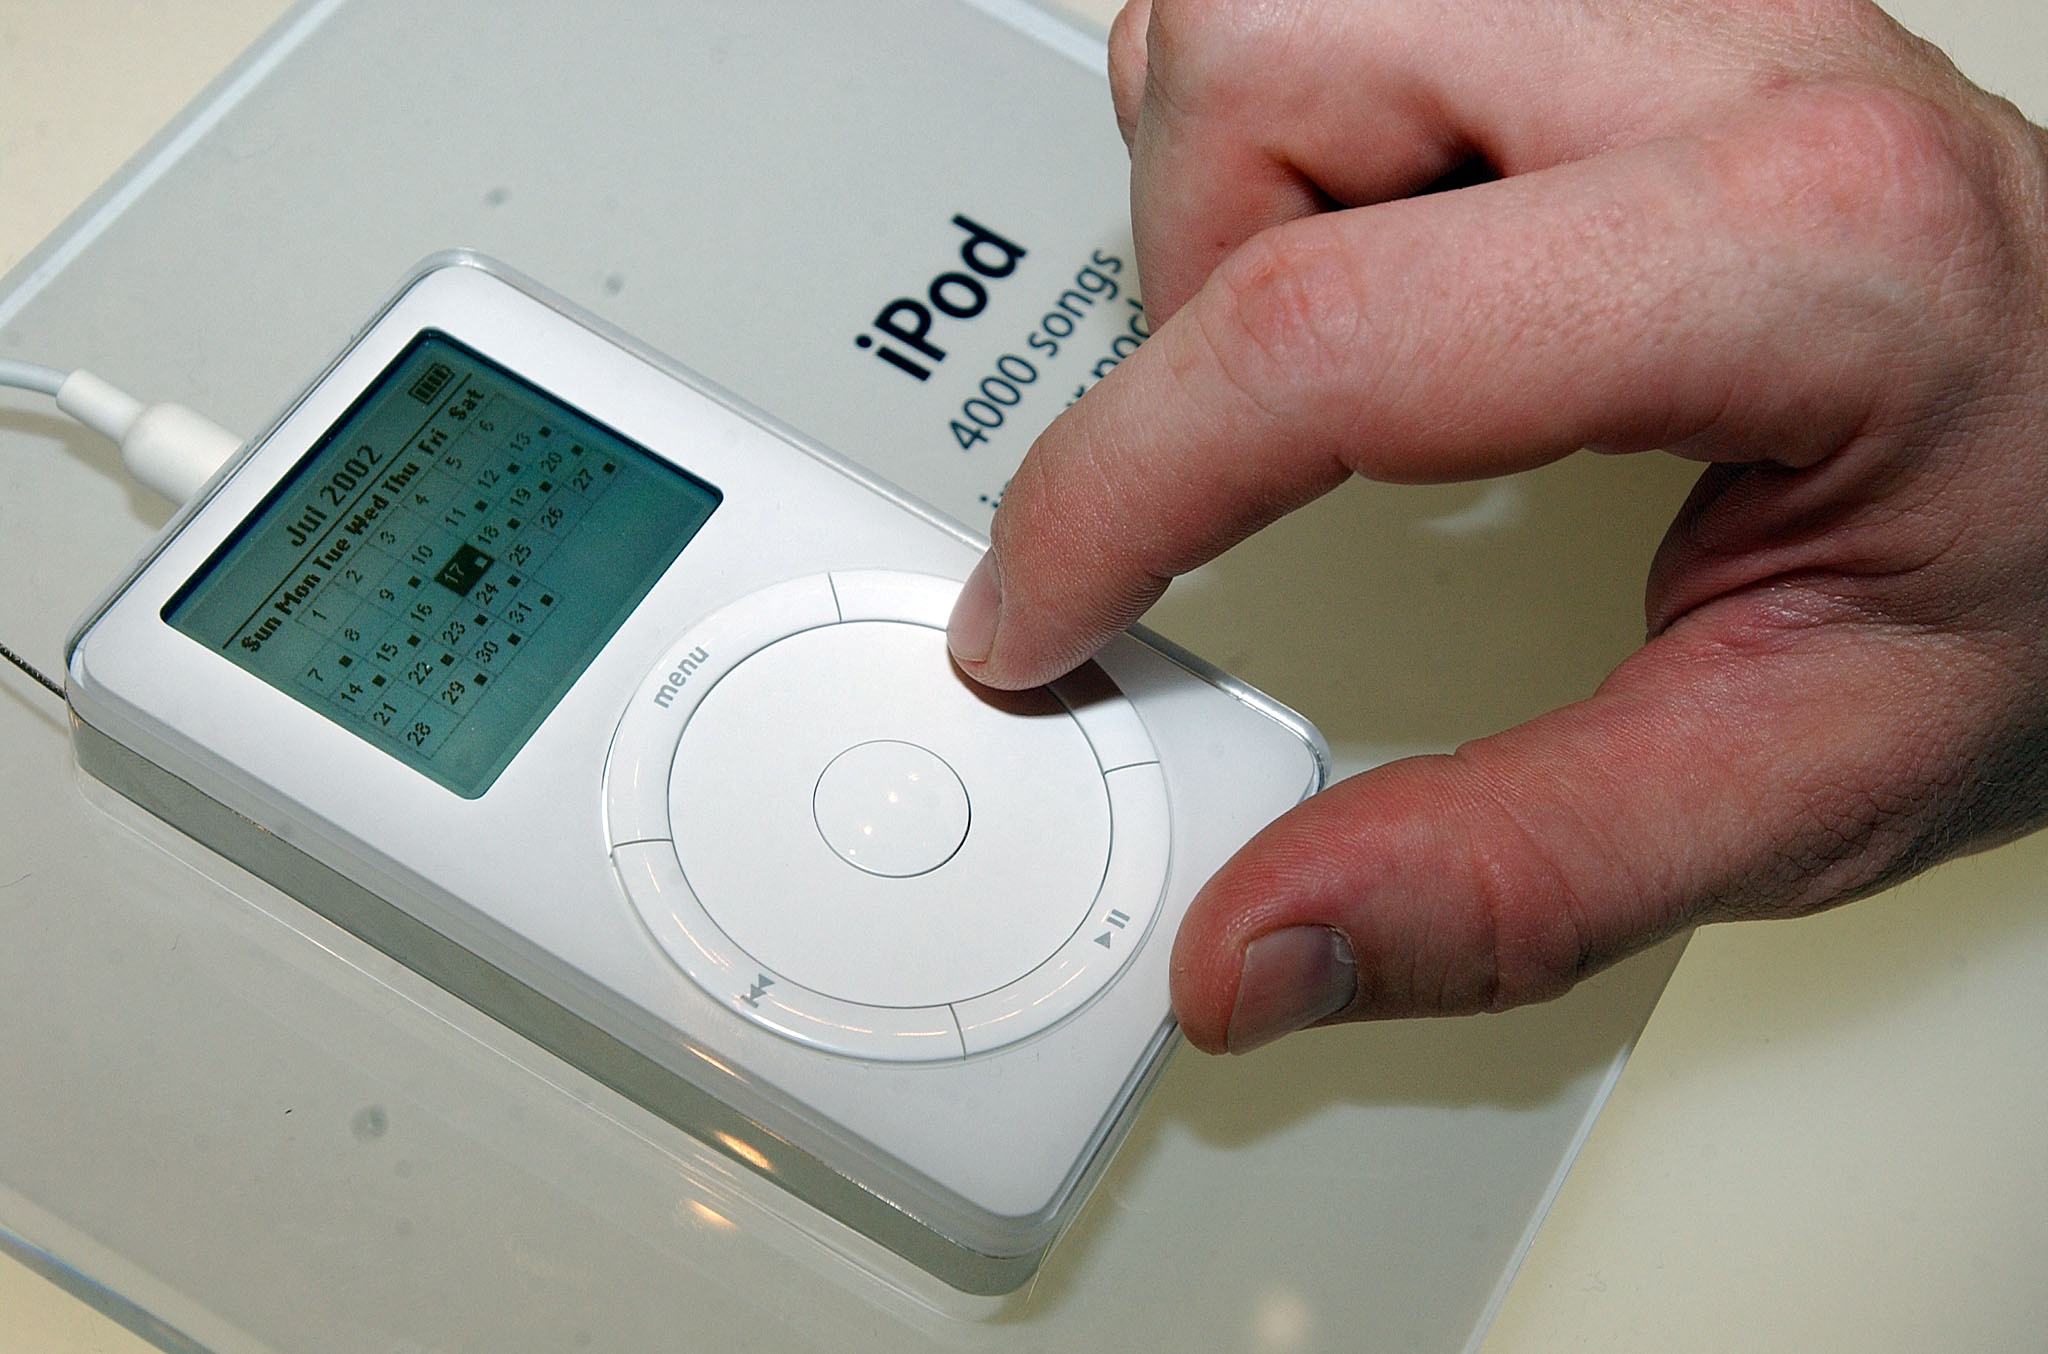 An updated version of Apple's popular iPod MP3 player at the Macworld Conference and Expo in New York